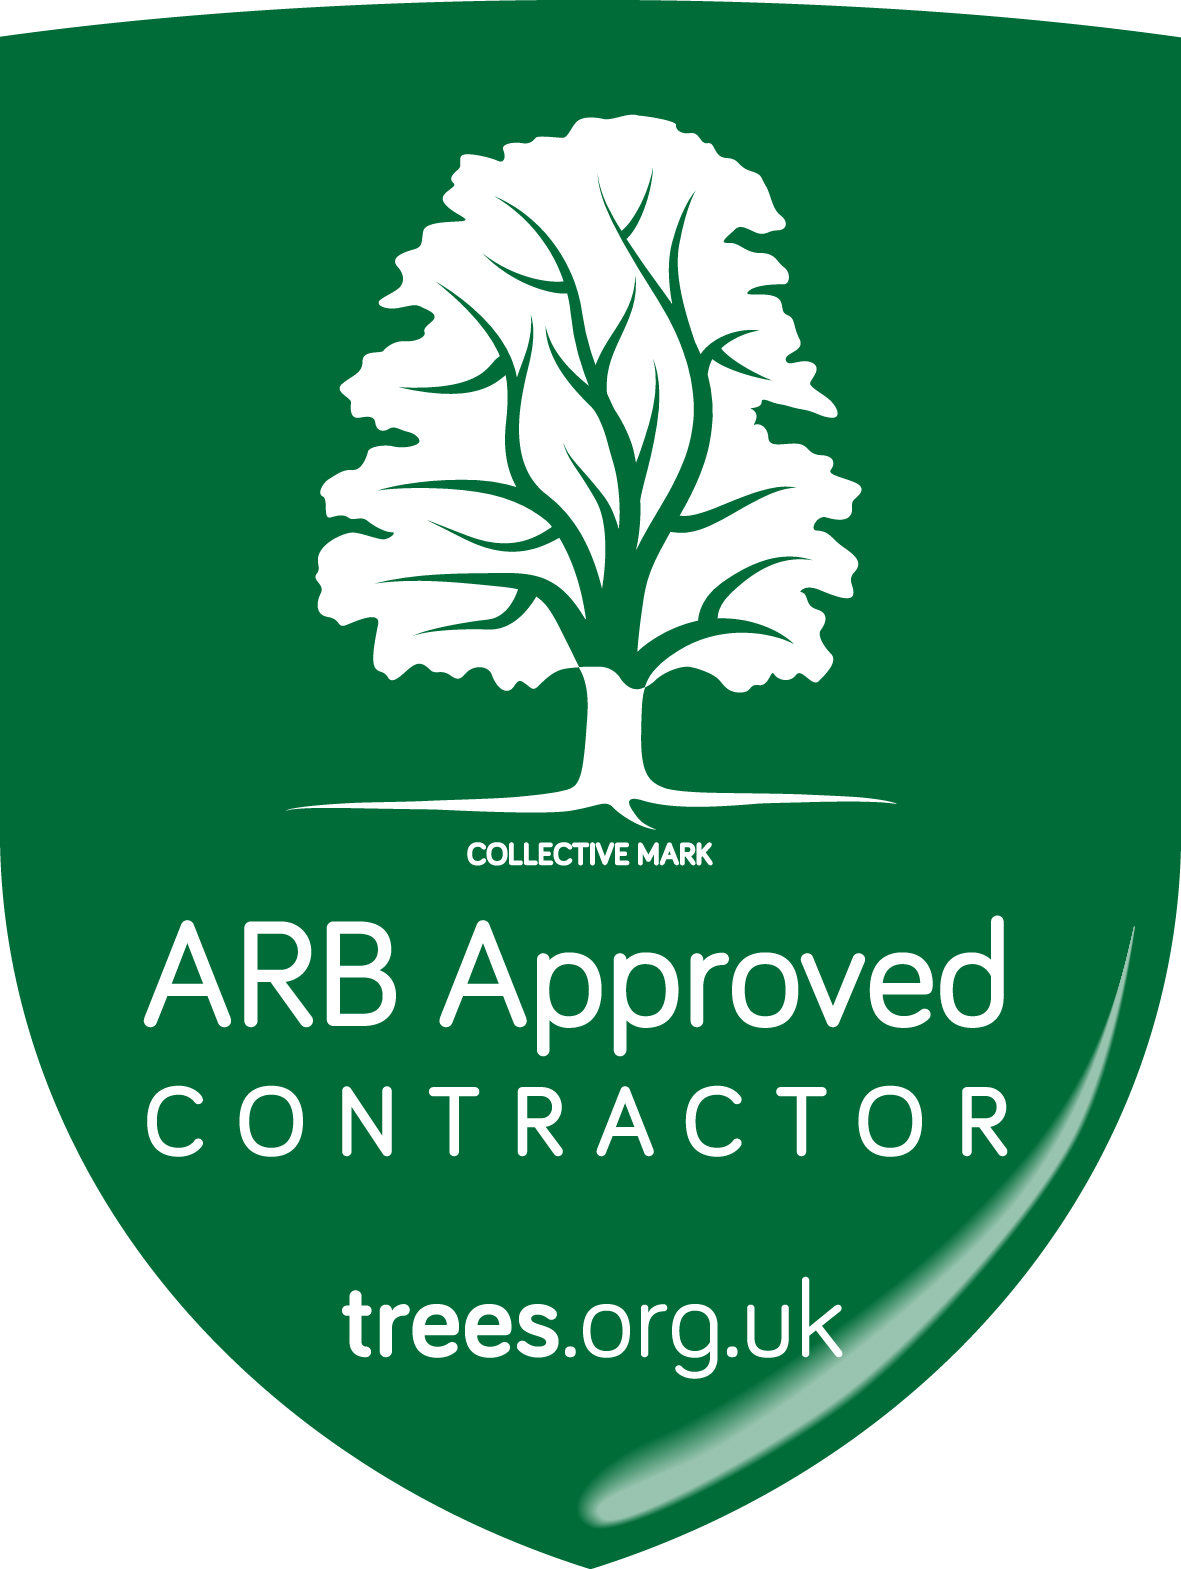 ARB Approved Contractors